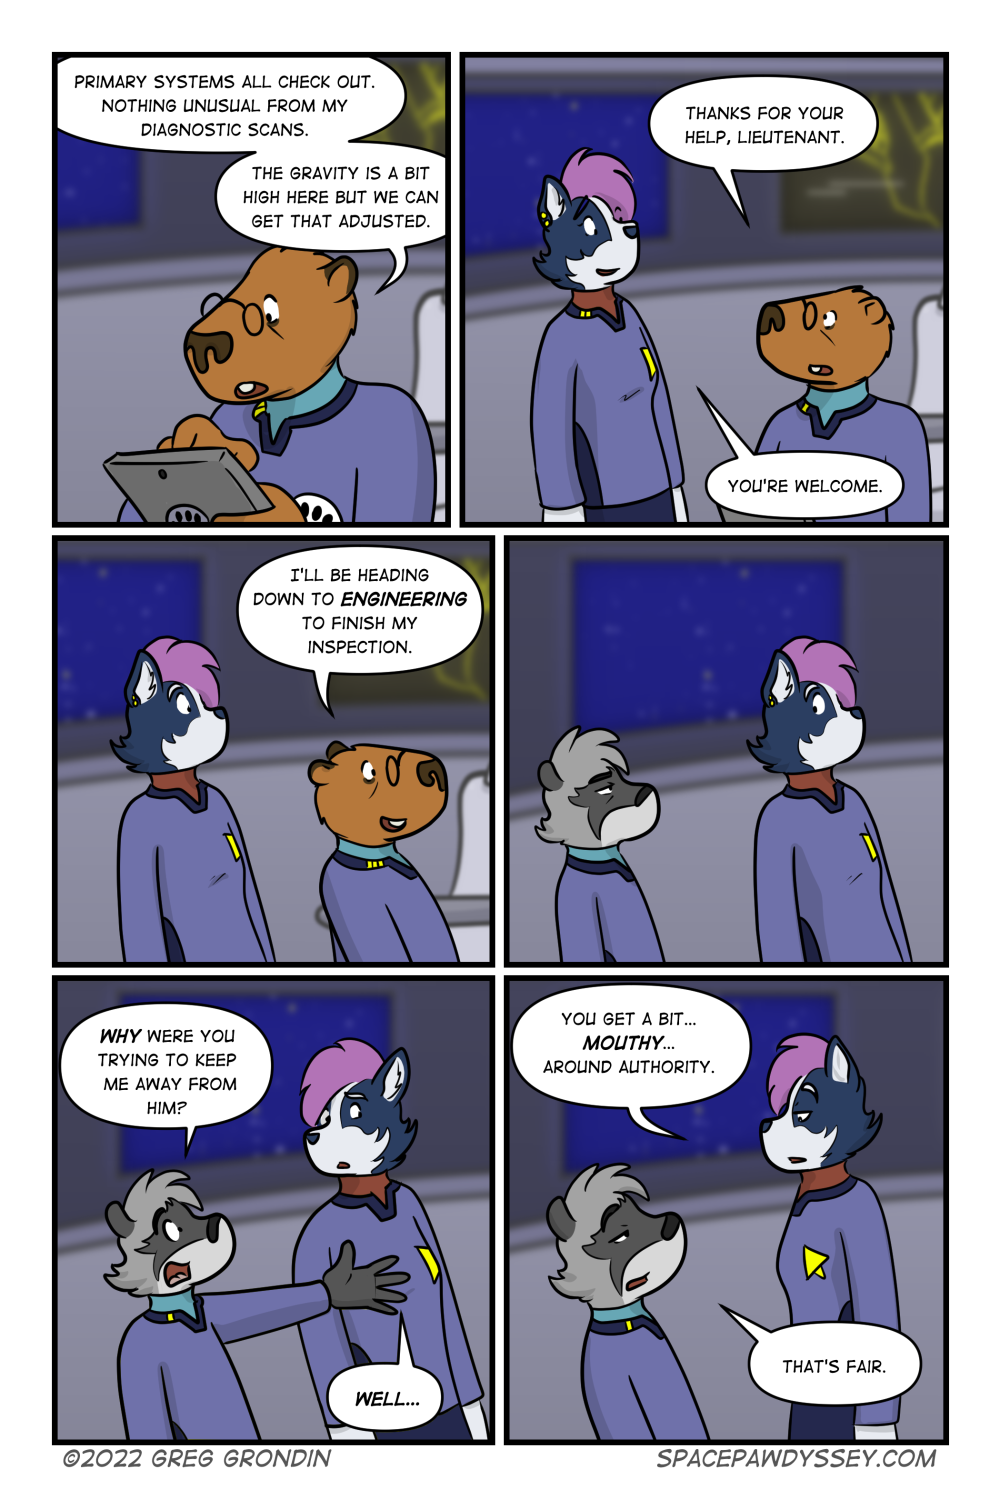 Space Pawdyssey #537